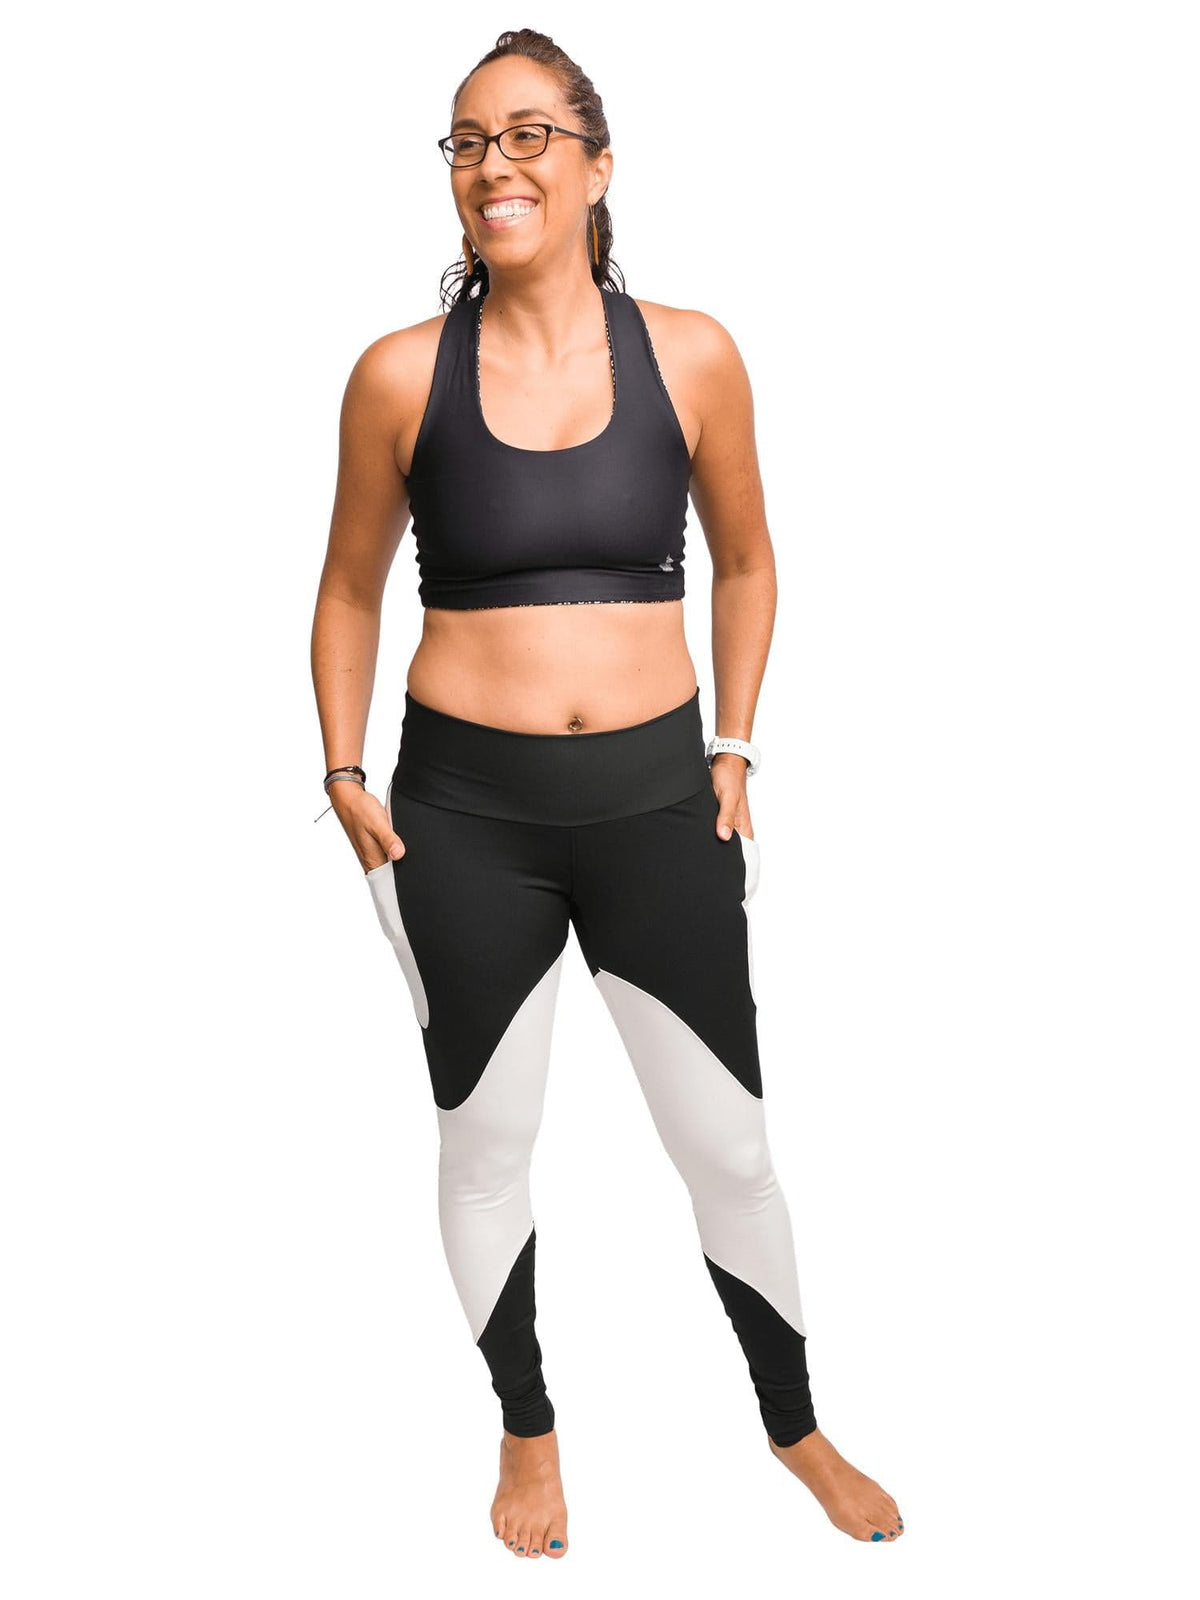 Up To 76% Off on LESIES Women's Workout Yoga R